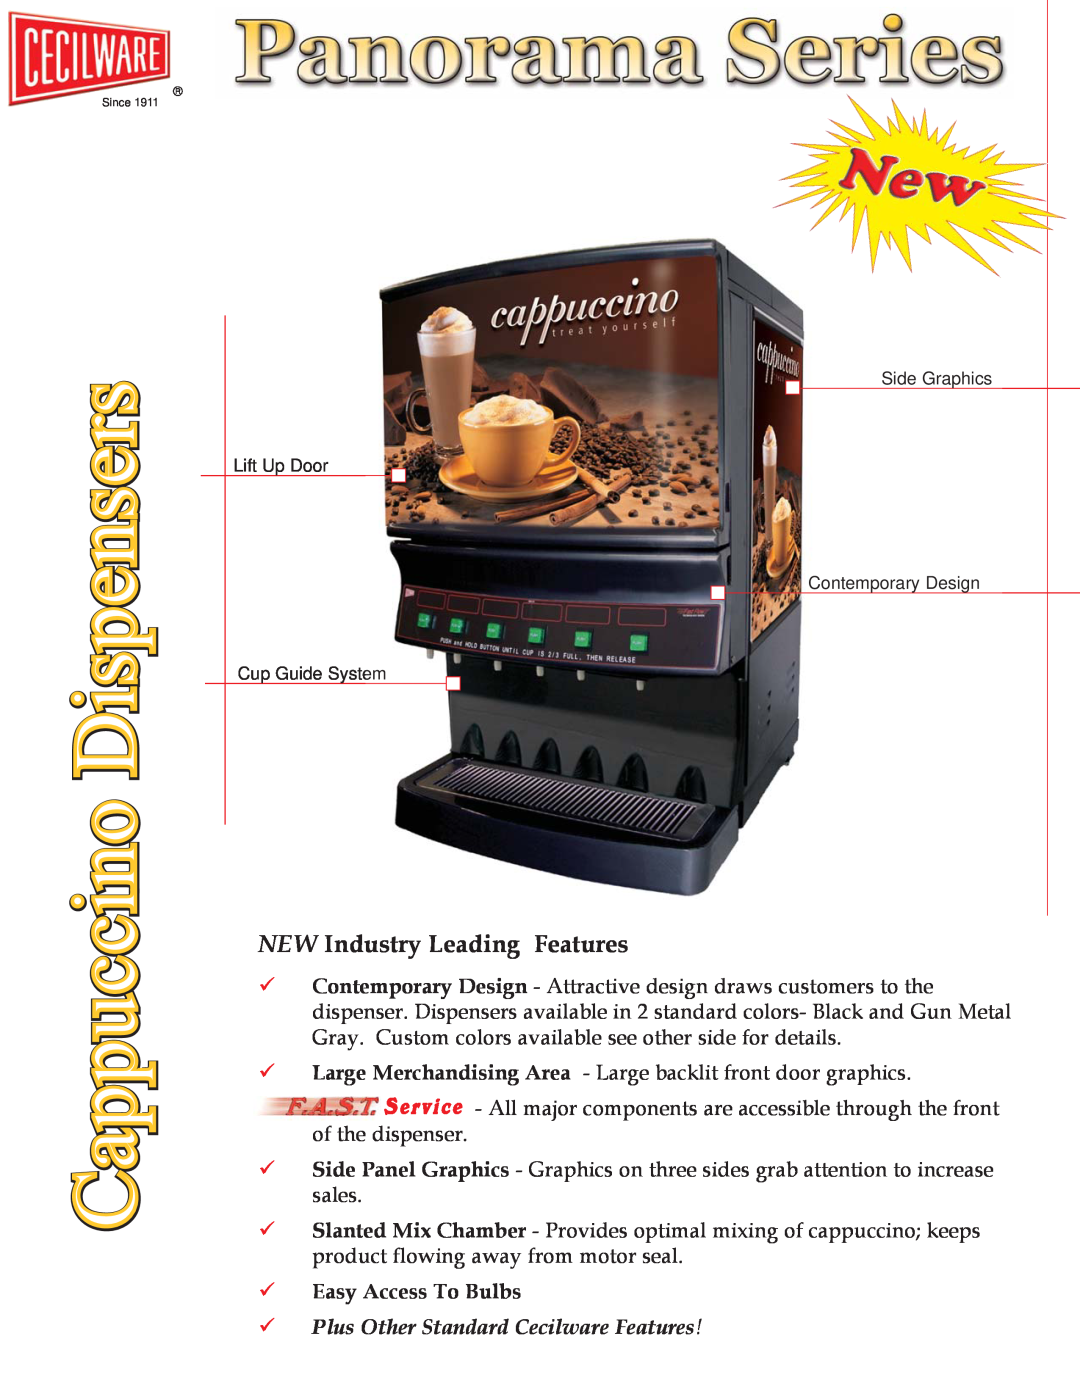 Cecilware GB6MP-10LD-U 6 manual 9Plus Other Standard Cecilware Features, Dispensers, Cappuccino, 9Easy Access To Bulbs 